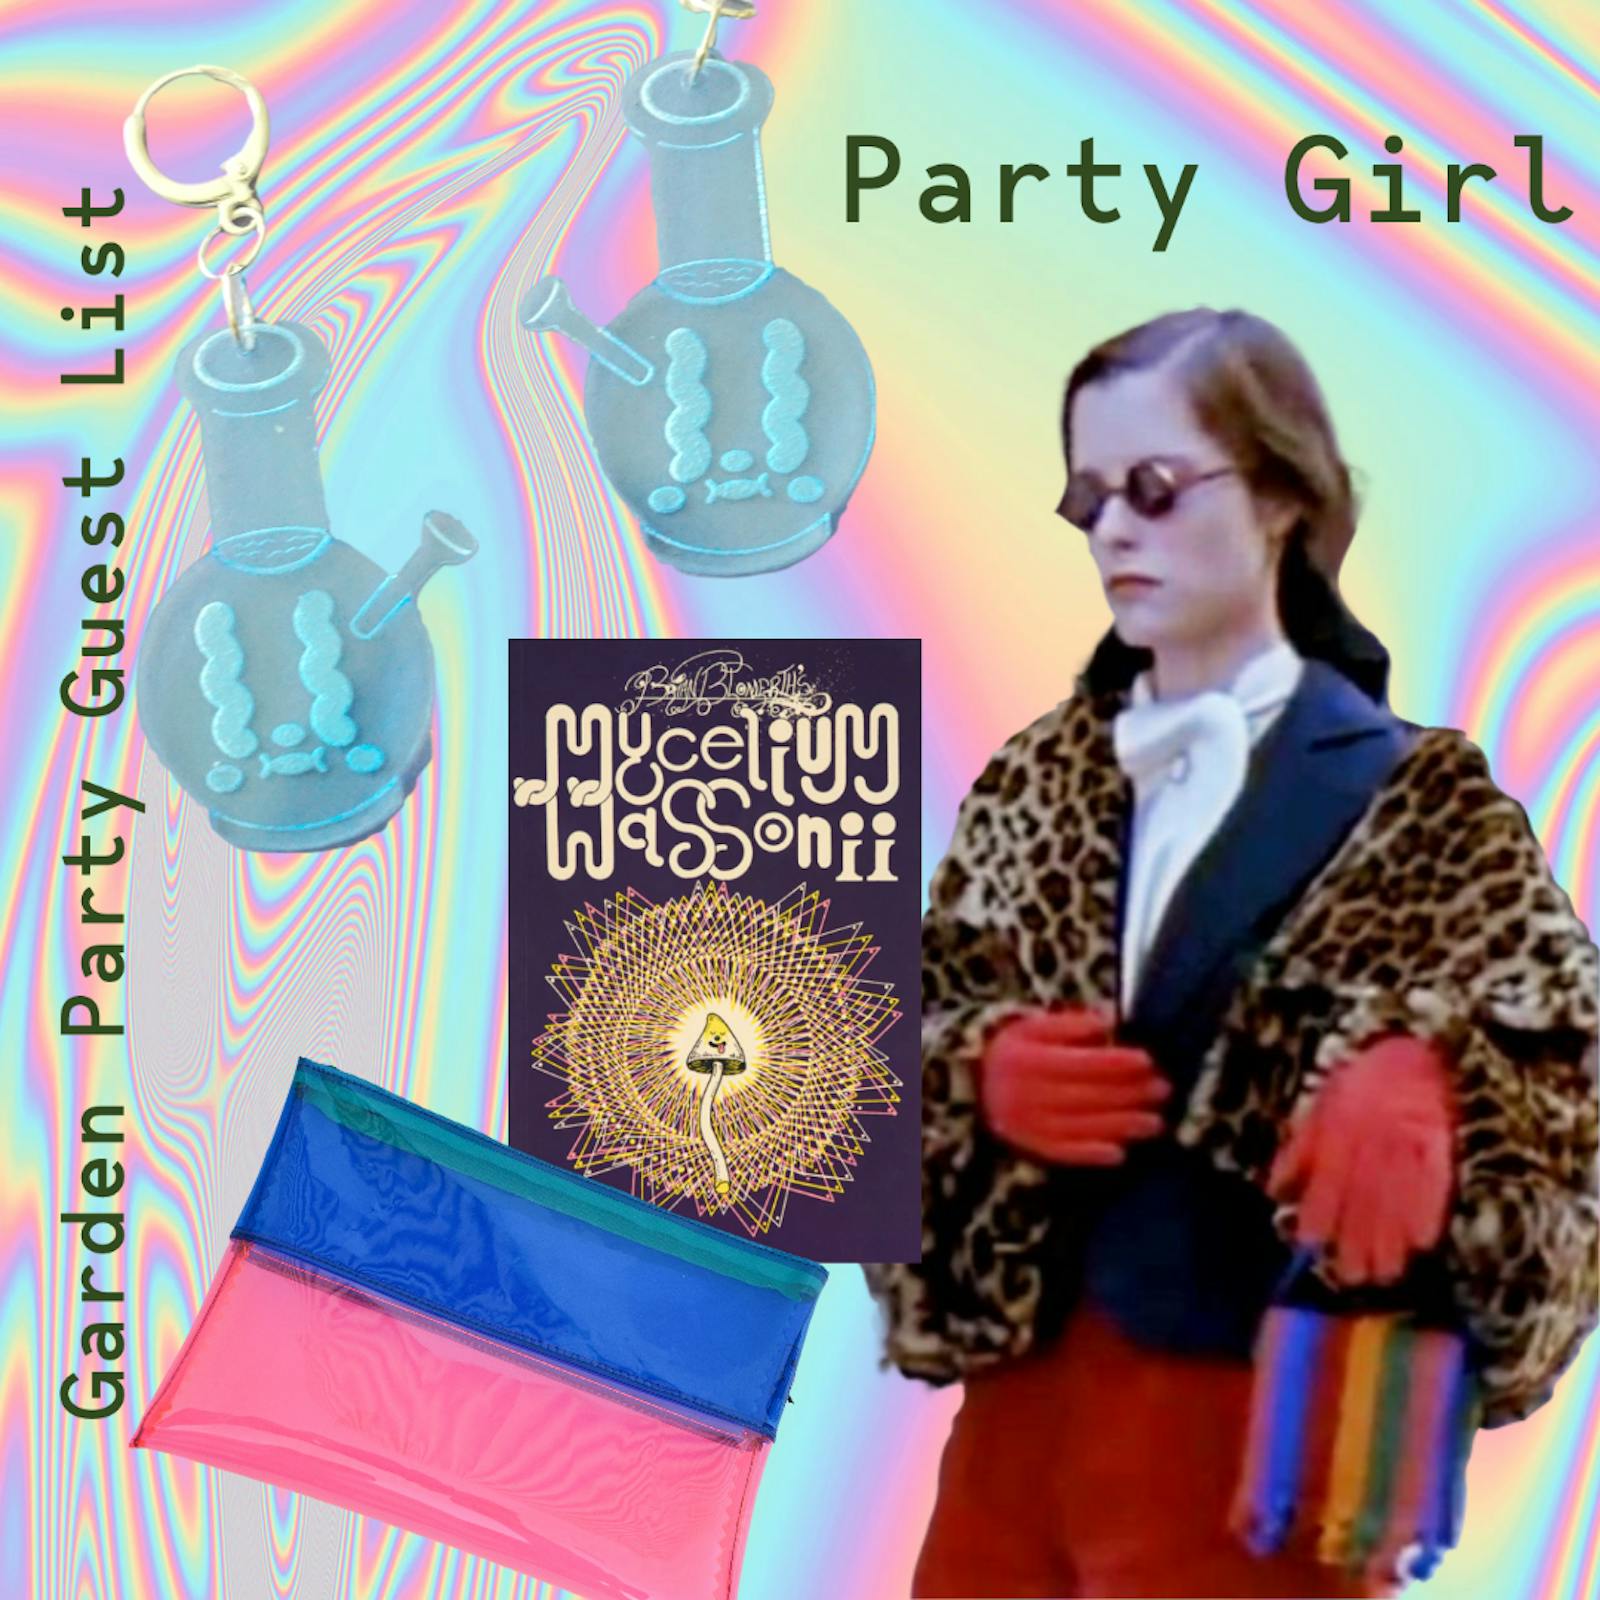 Garden Party Guest List: Party Girl